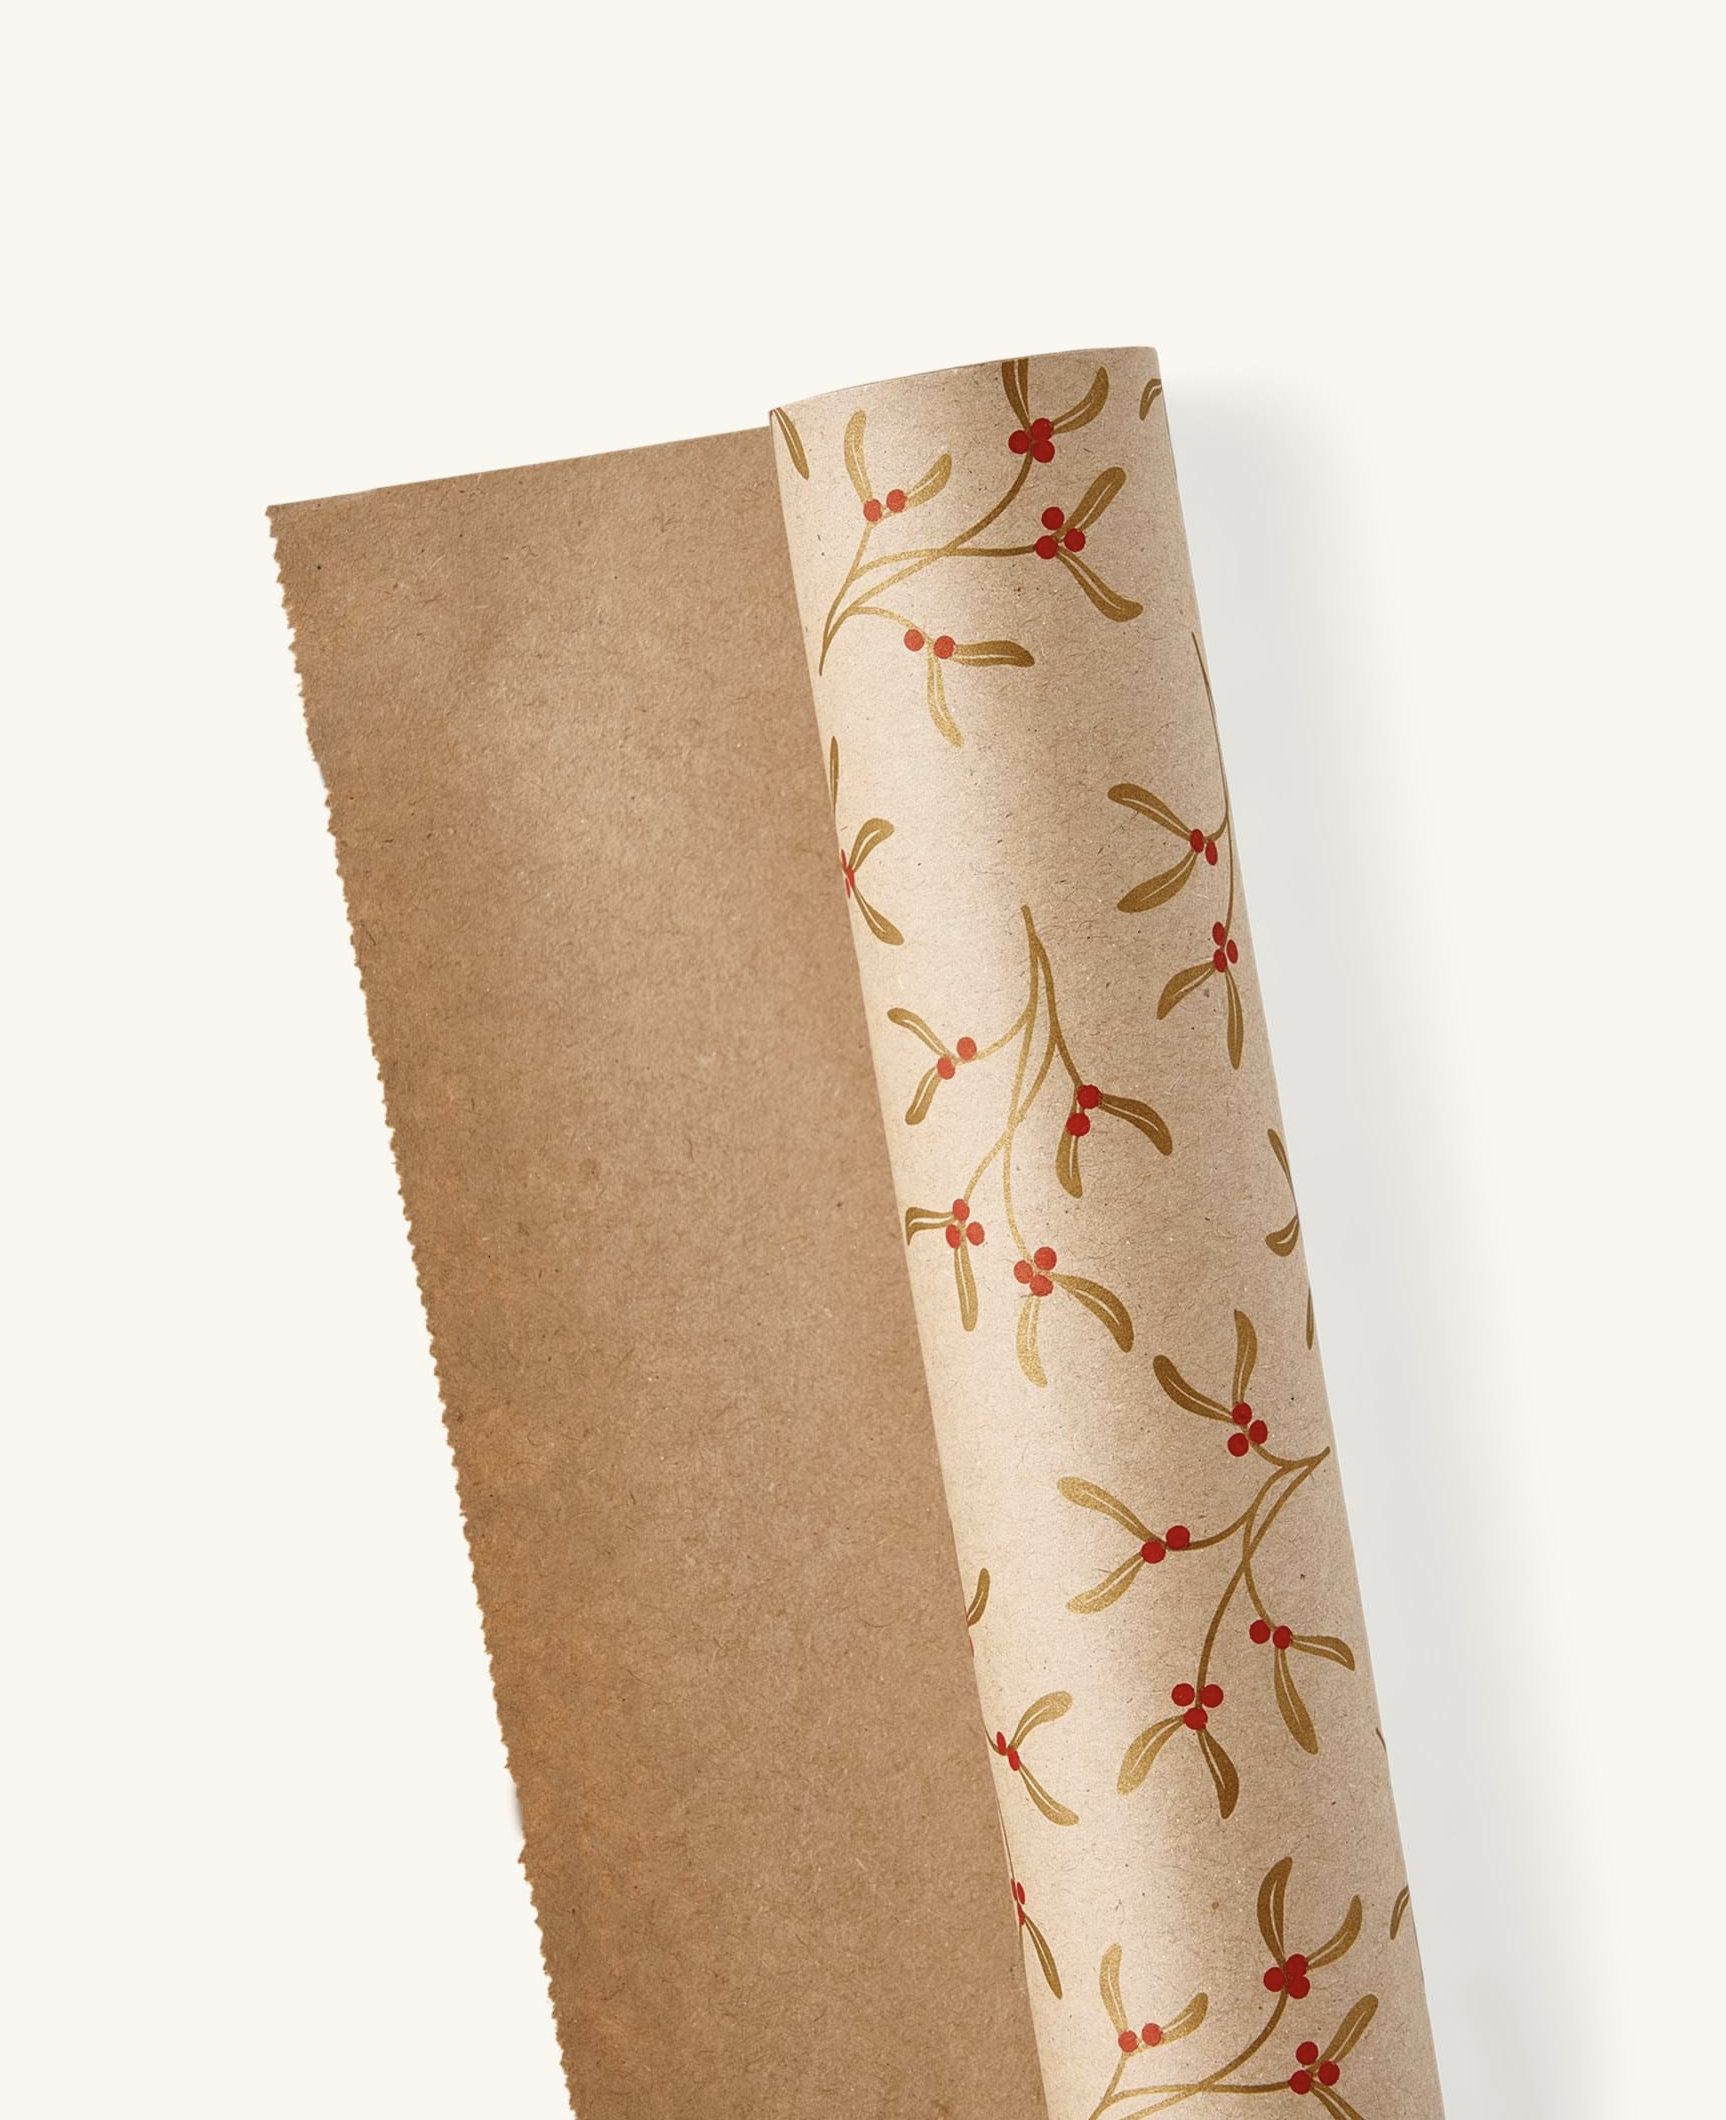   Christmas wrapping  from Sostrene Grenes   